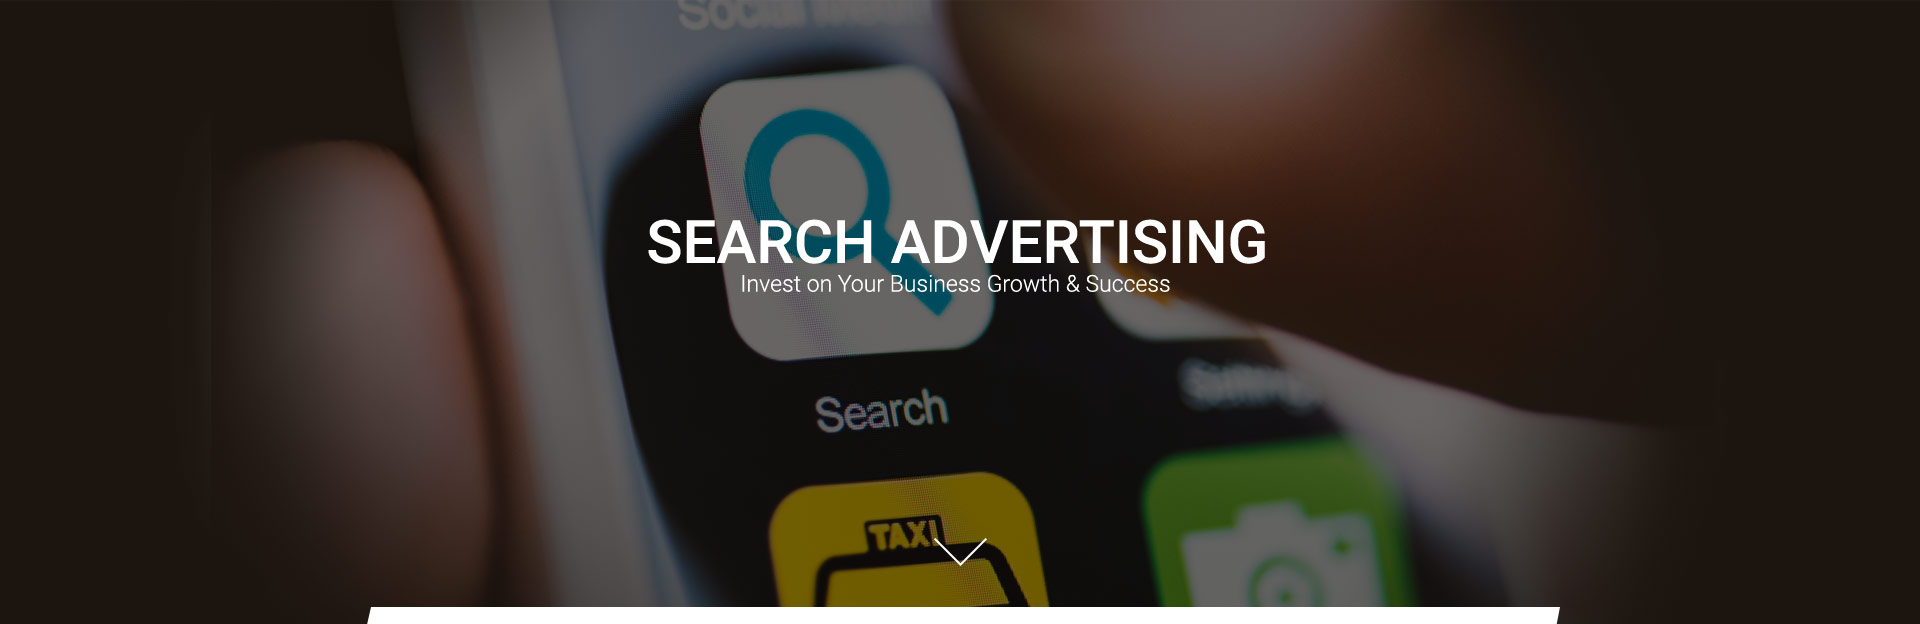 Search Advertising 